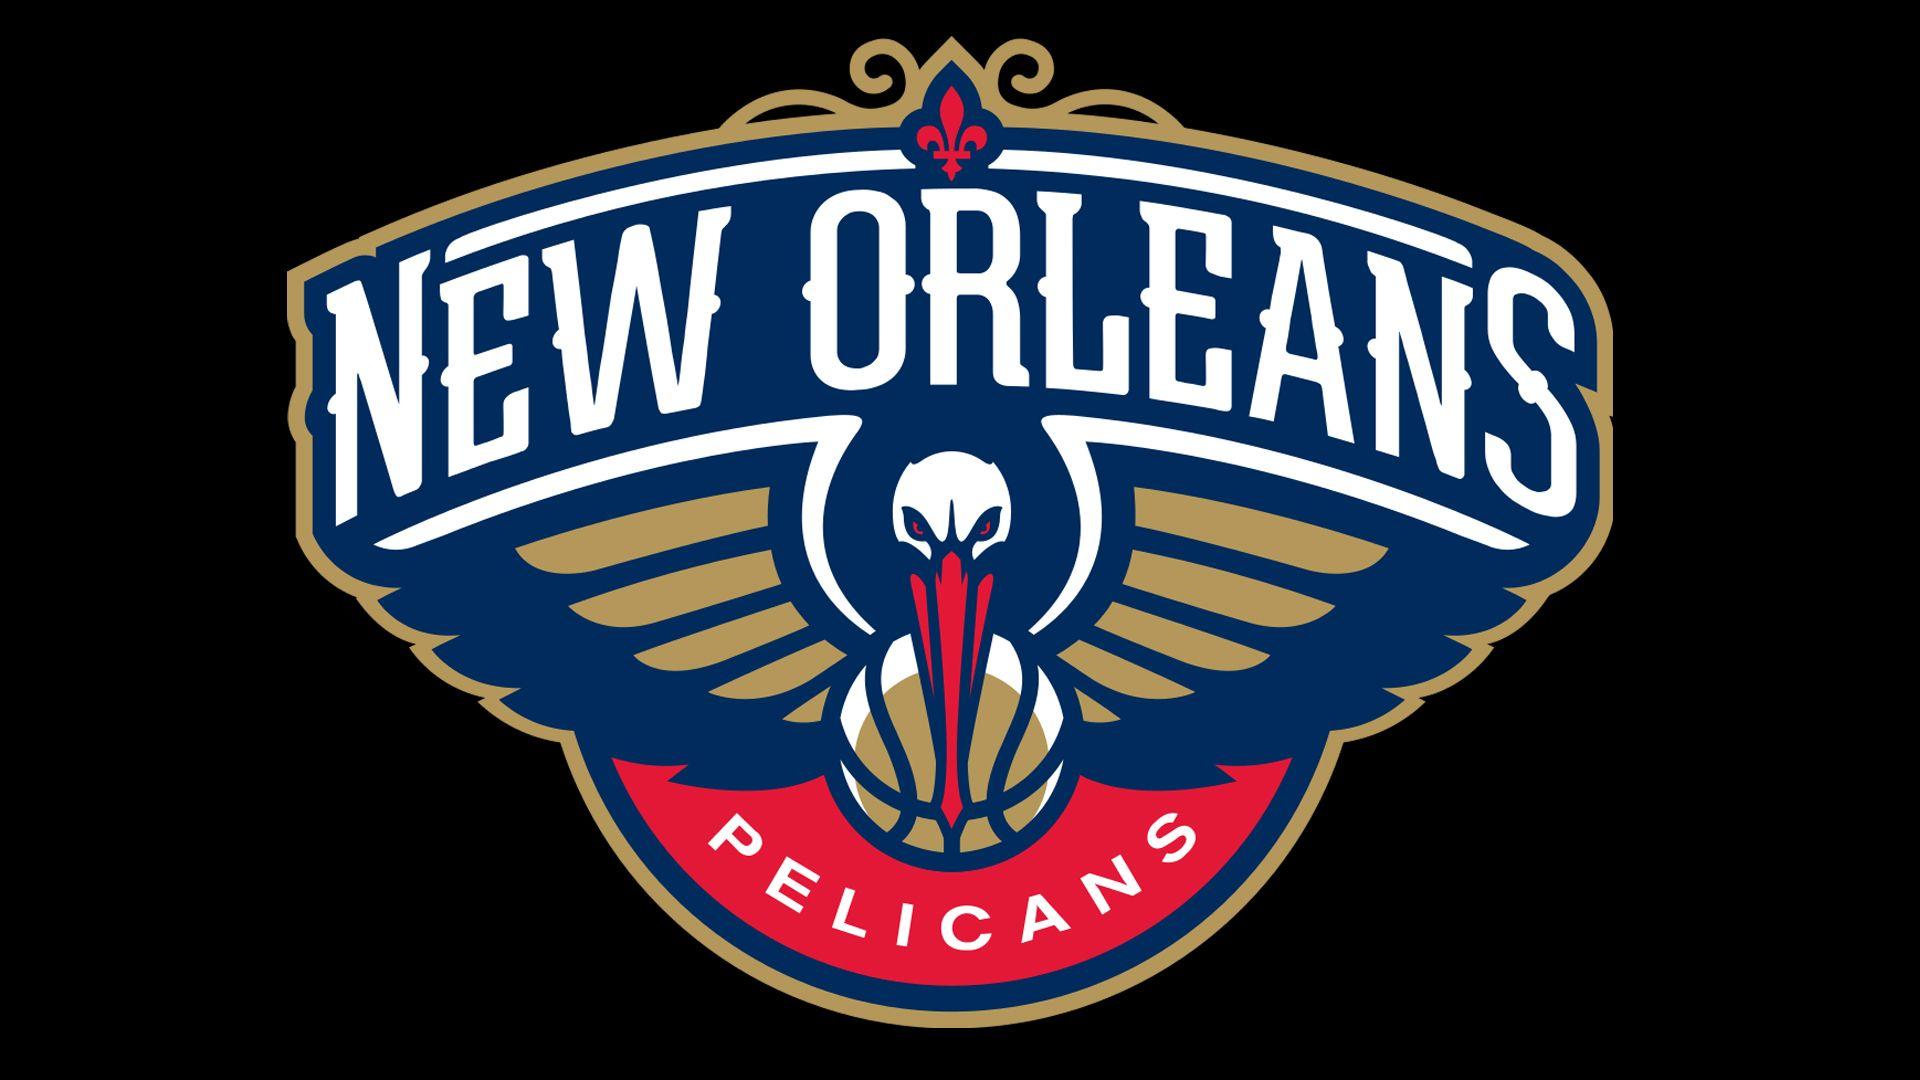 Pelicans Logo - Meaning New Orleans Pelicans logo and symbol | history and evolution